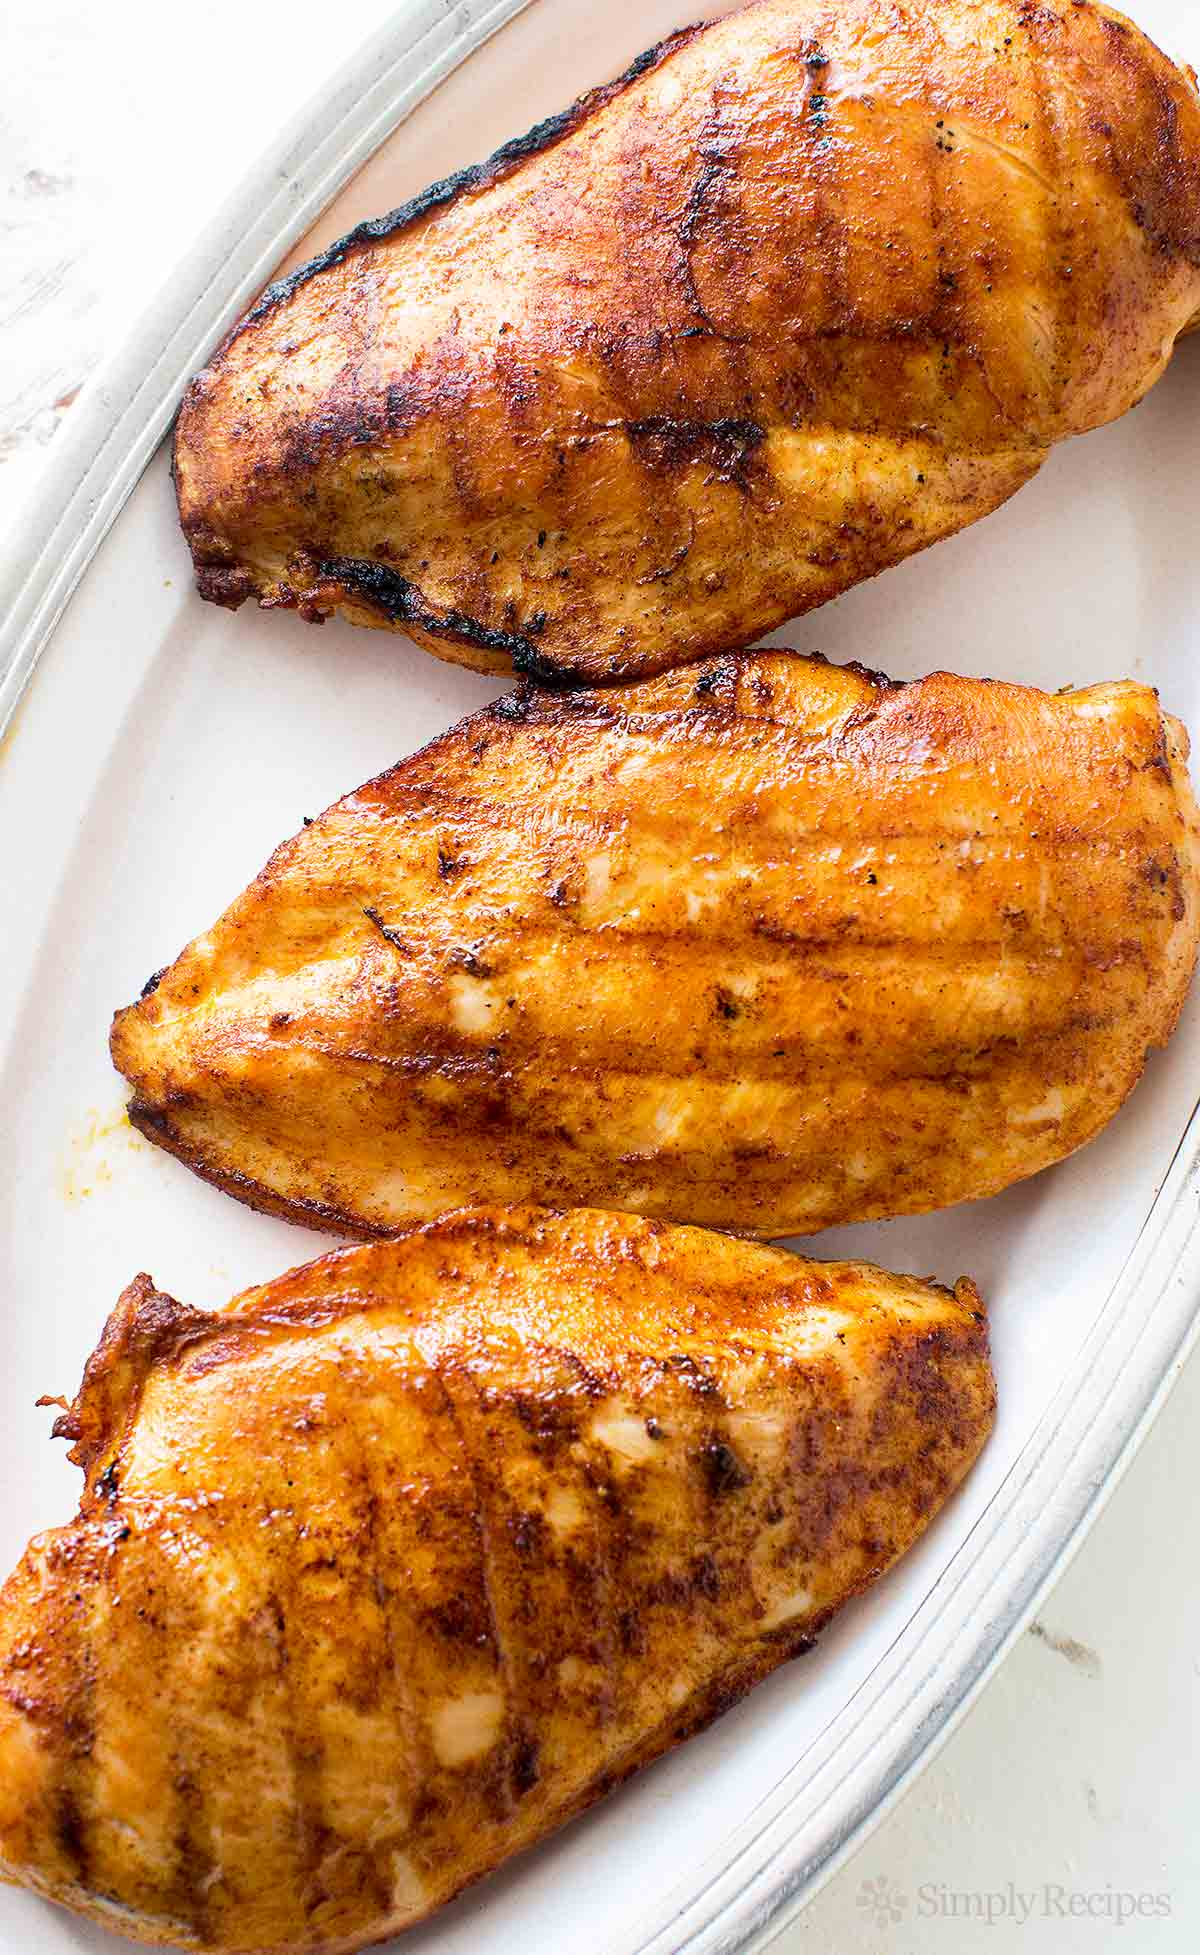 Recipes For Chicken Breasts
 How to Grill Juicy Boneless Skinless Chicken Breasts